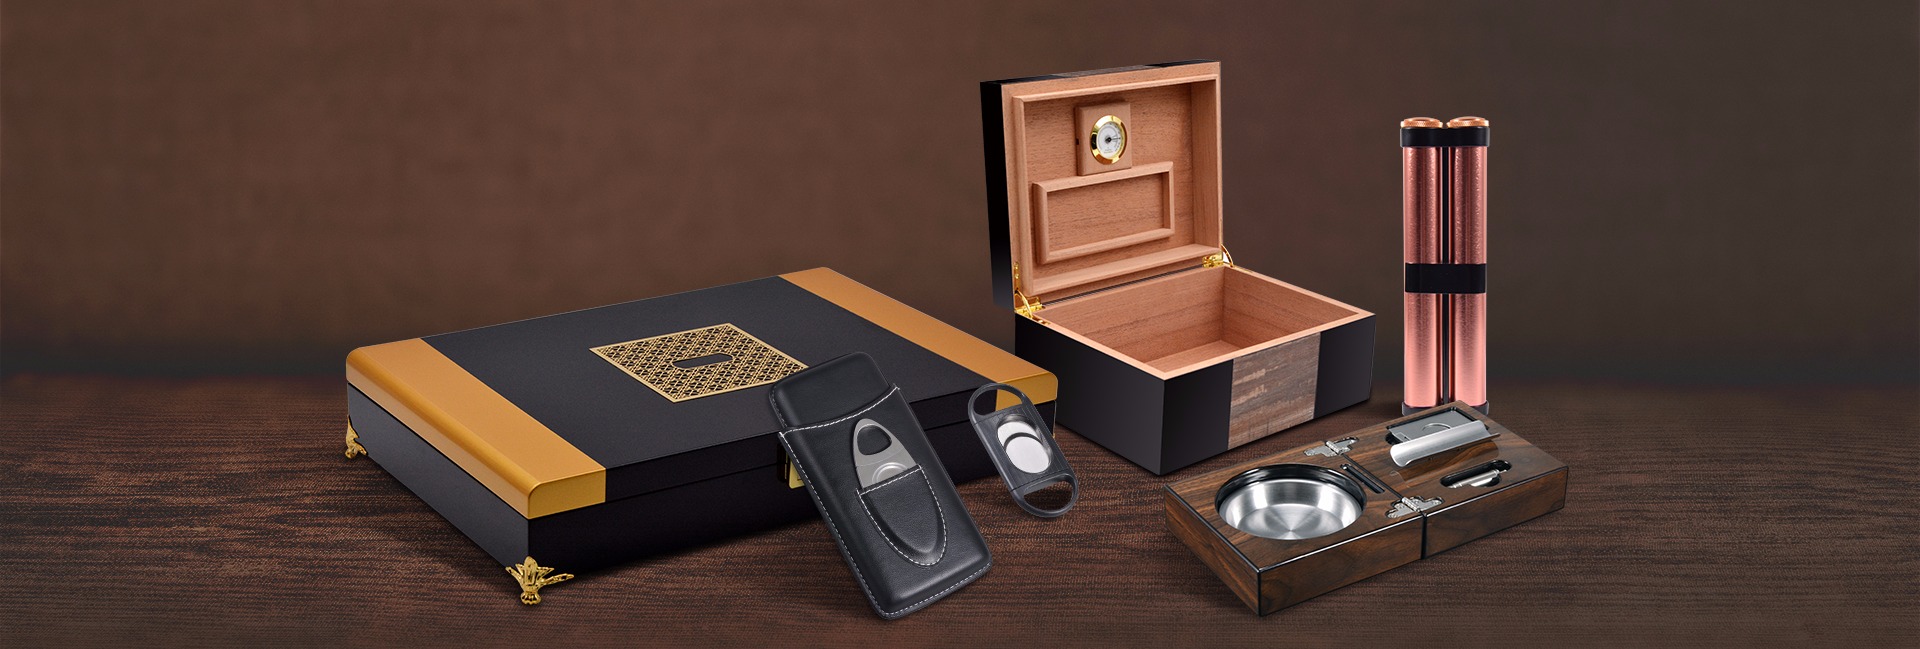 Cabinet cigar humidor WLH-0558 Details 2